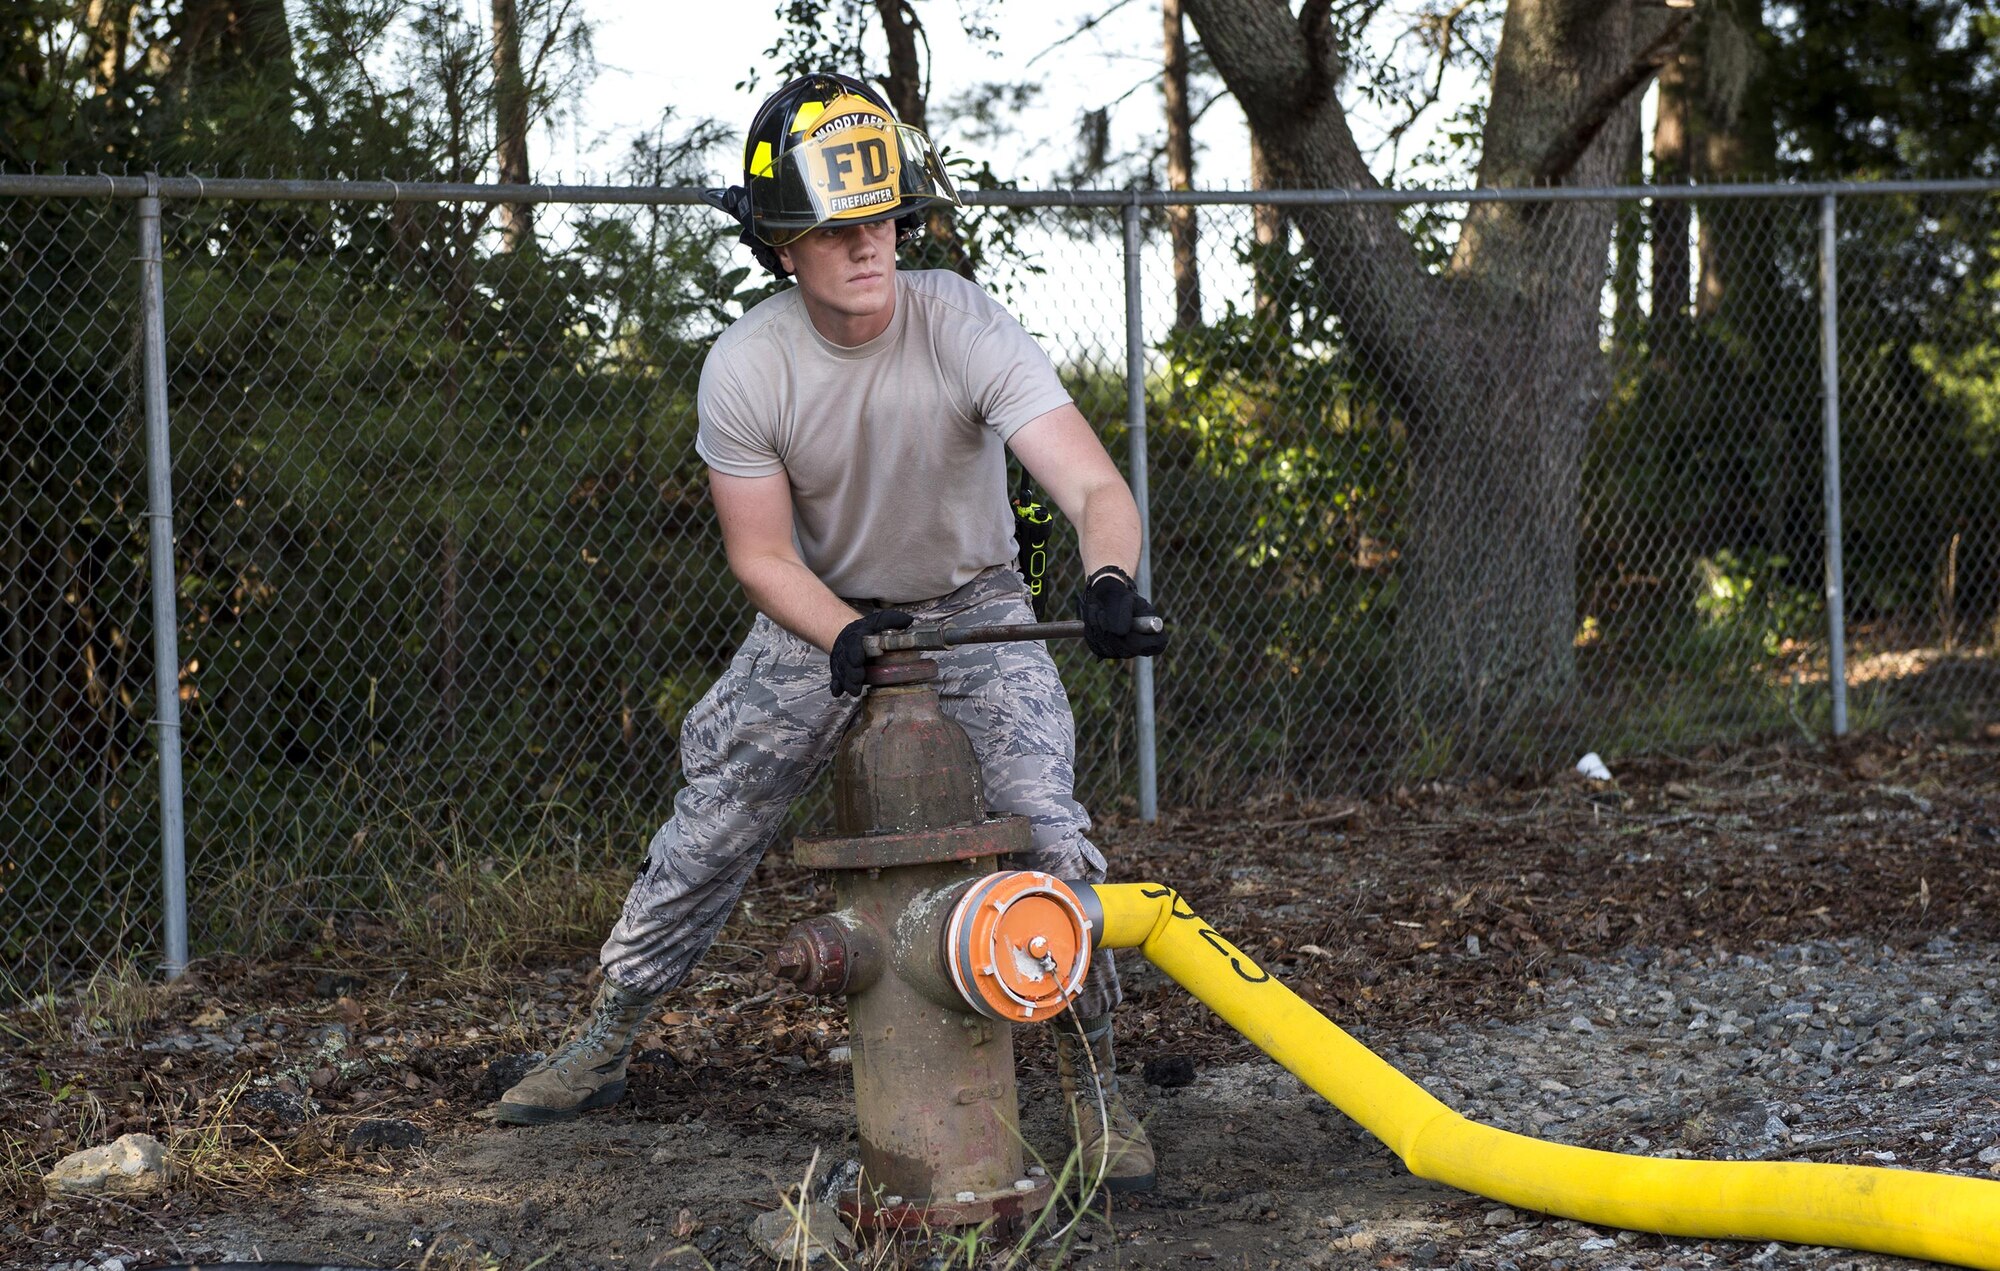 U.S. Air Force Airman Jacob Molden, 23d Civil Engineer Squadron firefighter, closes a fire hydrant during a joint live fire training exercise, Aug. 24, 2016, at Moody Air Force Base, Ga. After the firetrucks deplete their water supply, they’re refilled by the on-site hydrant.  (U.S. Air Force photo by Airman 1st Class Janiqua P. Robinson)